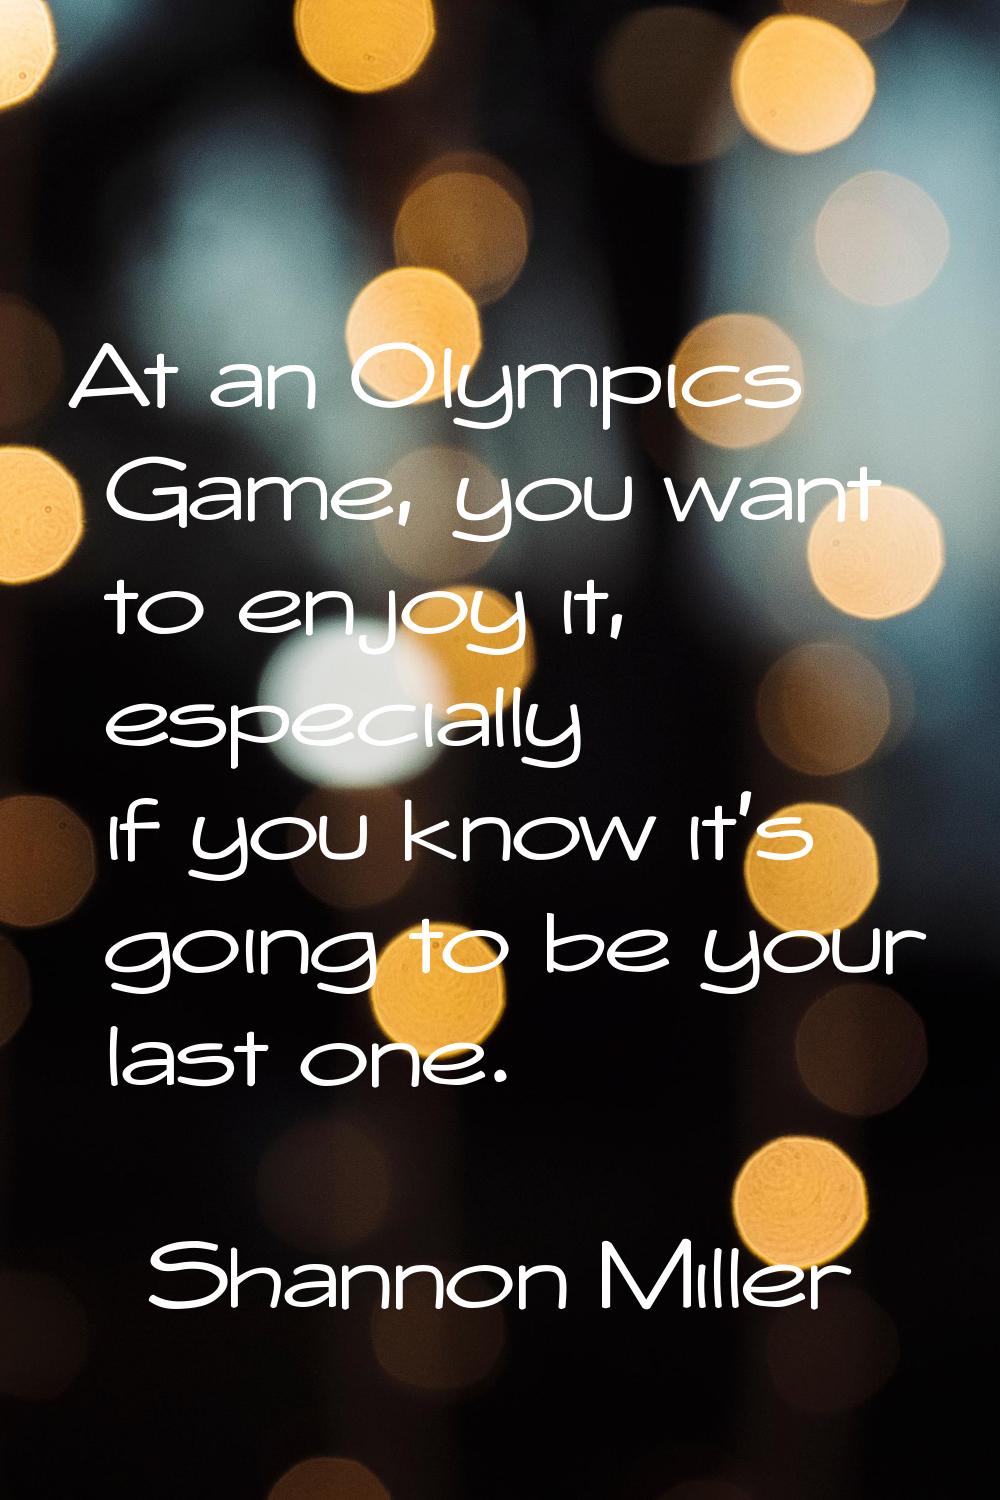 At an Olympics Game, you want to enjoy it, especially if you know it's going to be your last one.